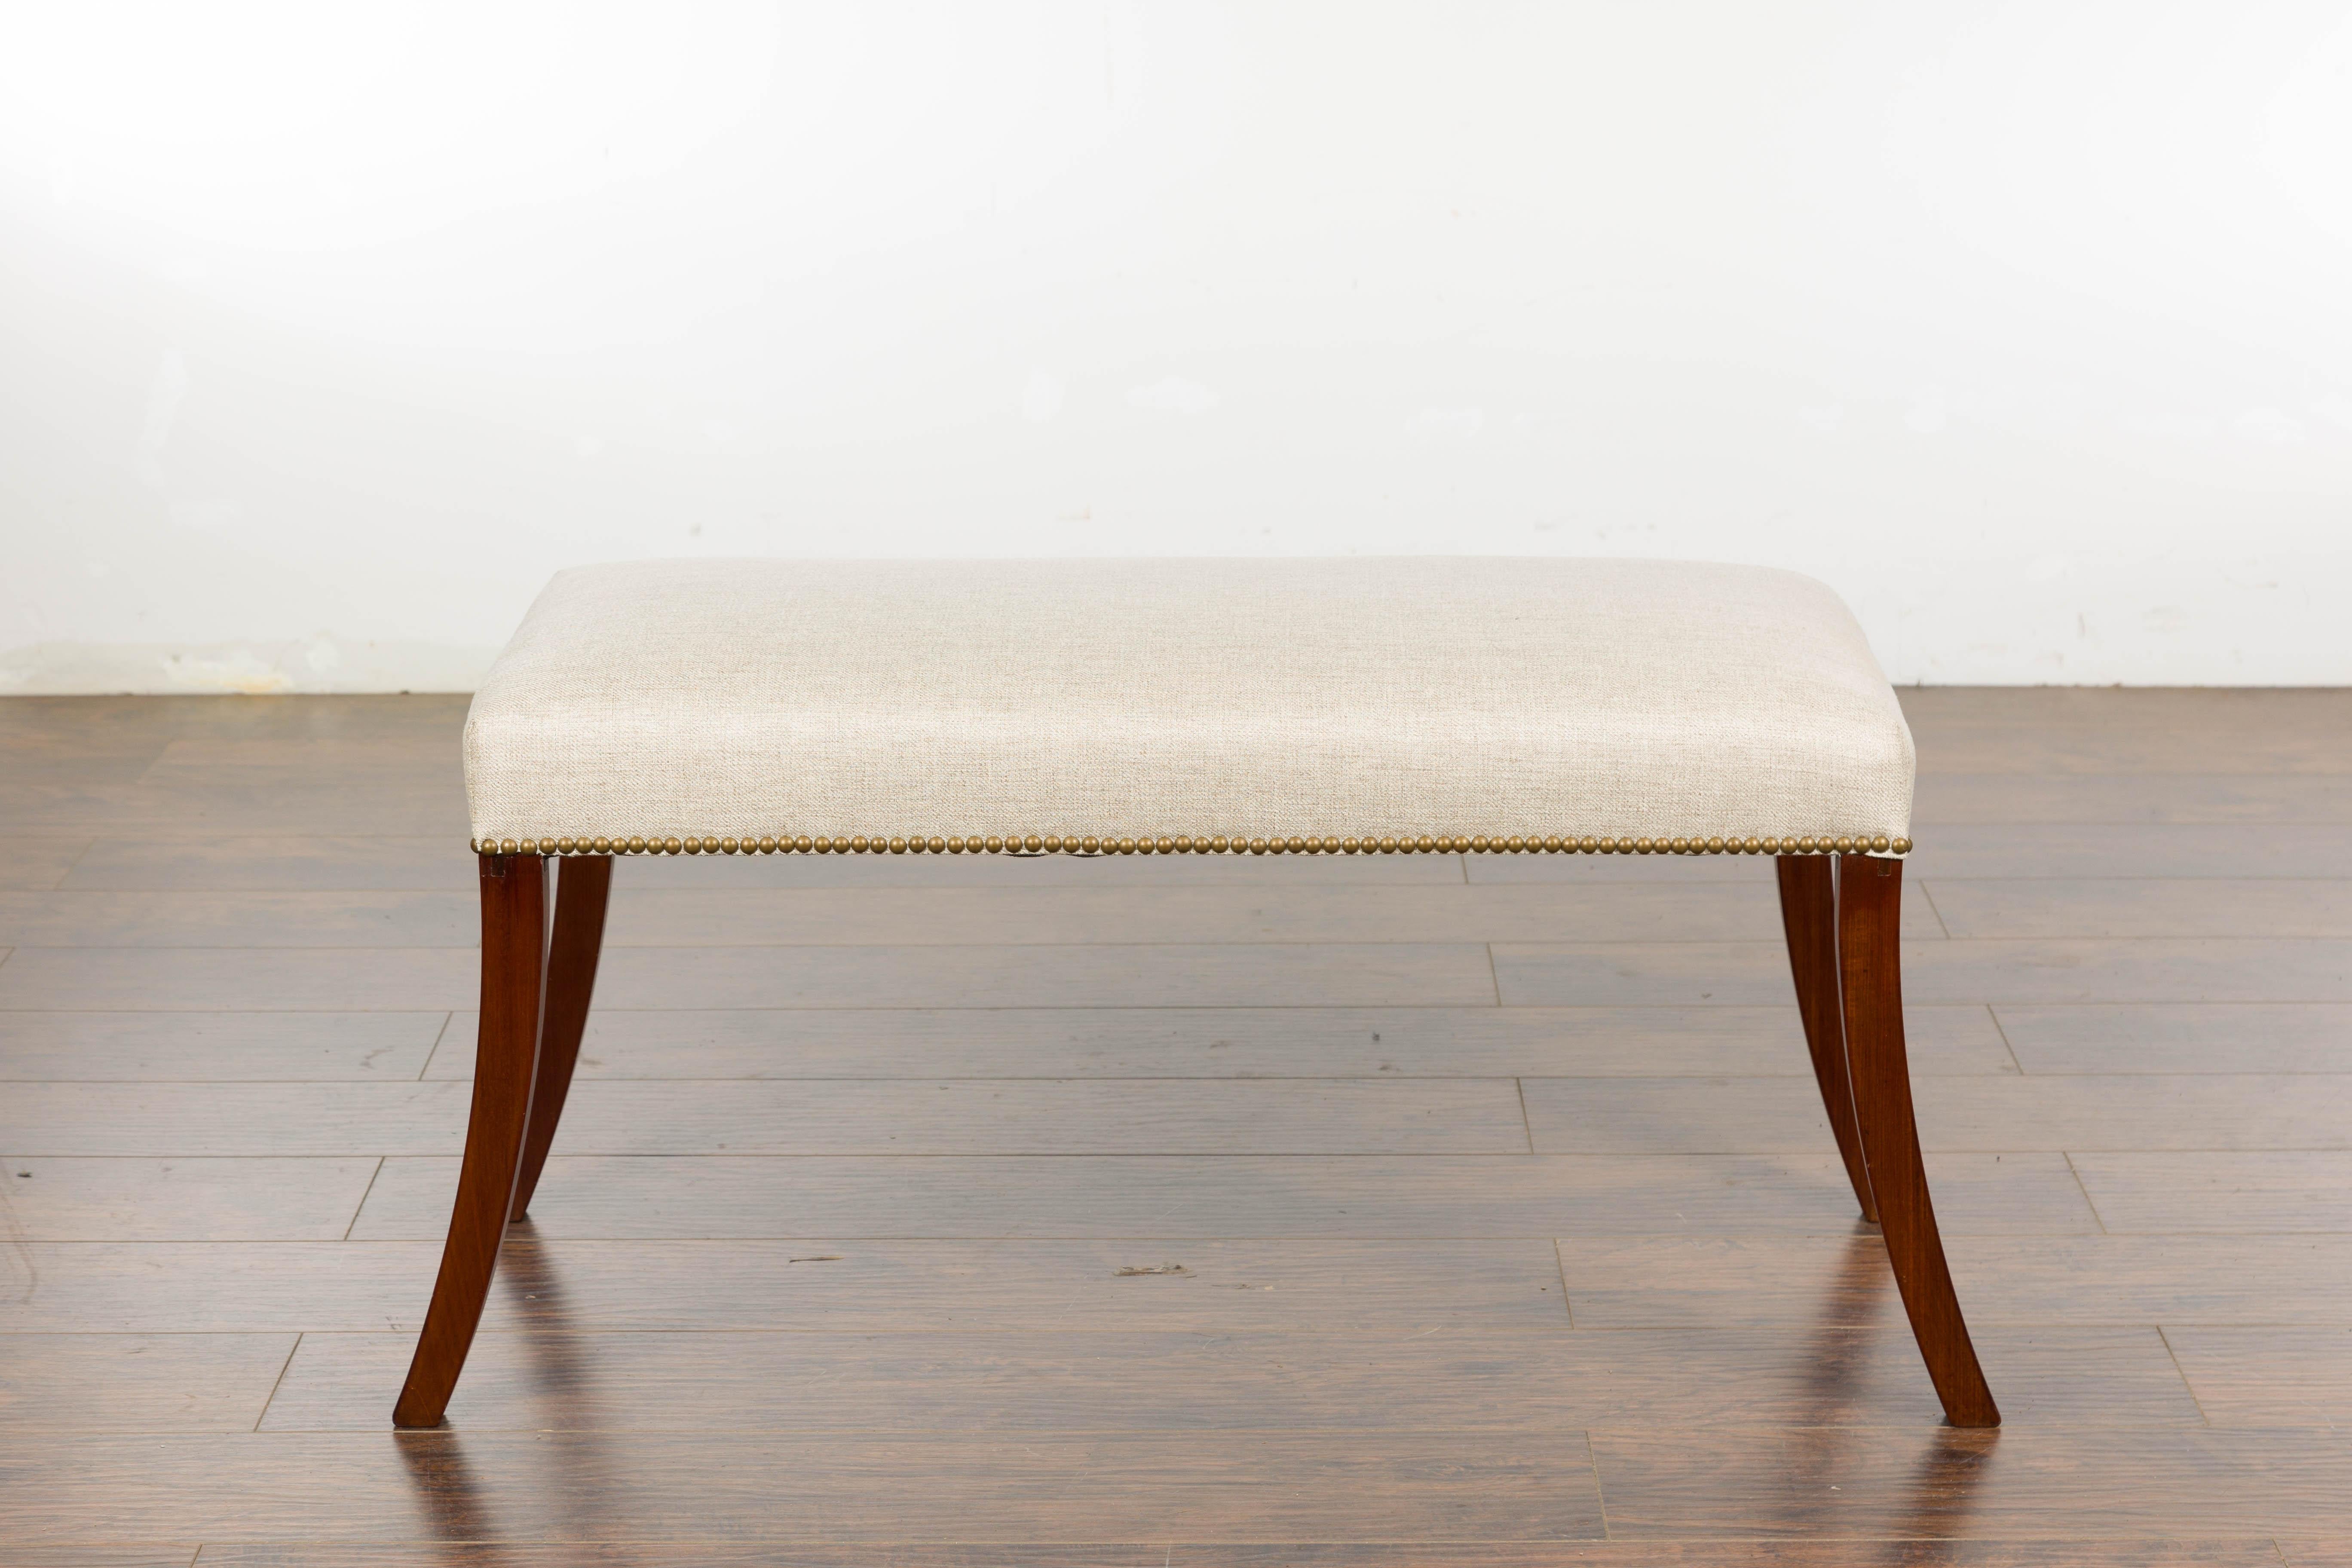 An English Regency bench from the 19th century with four saber legs and new custom linen upholstery with brass nailhead trim. Steeped in history and refined sophistication, this English Regency bench from the 19th century makes a stylish statement